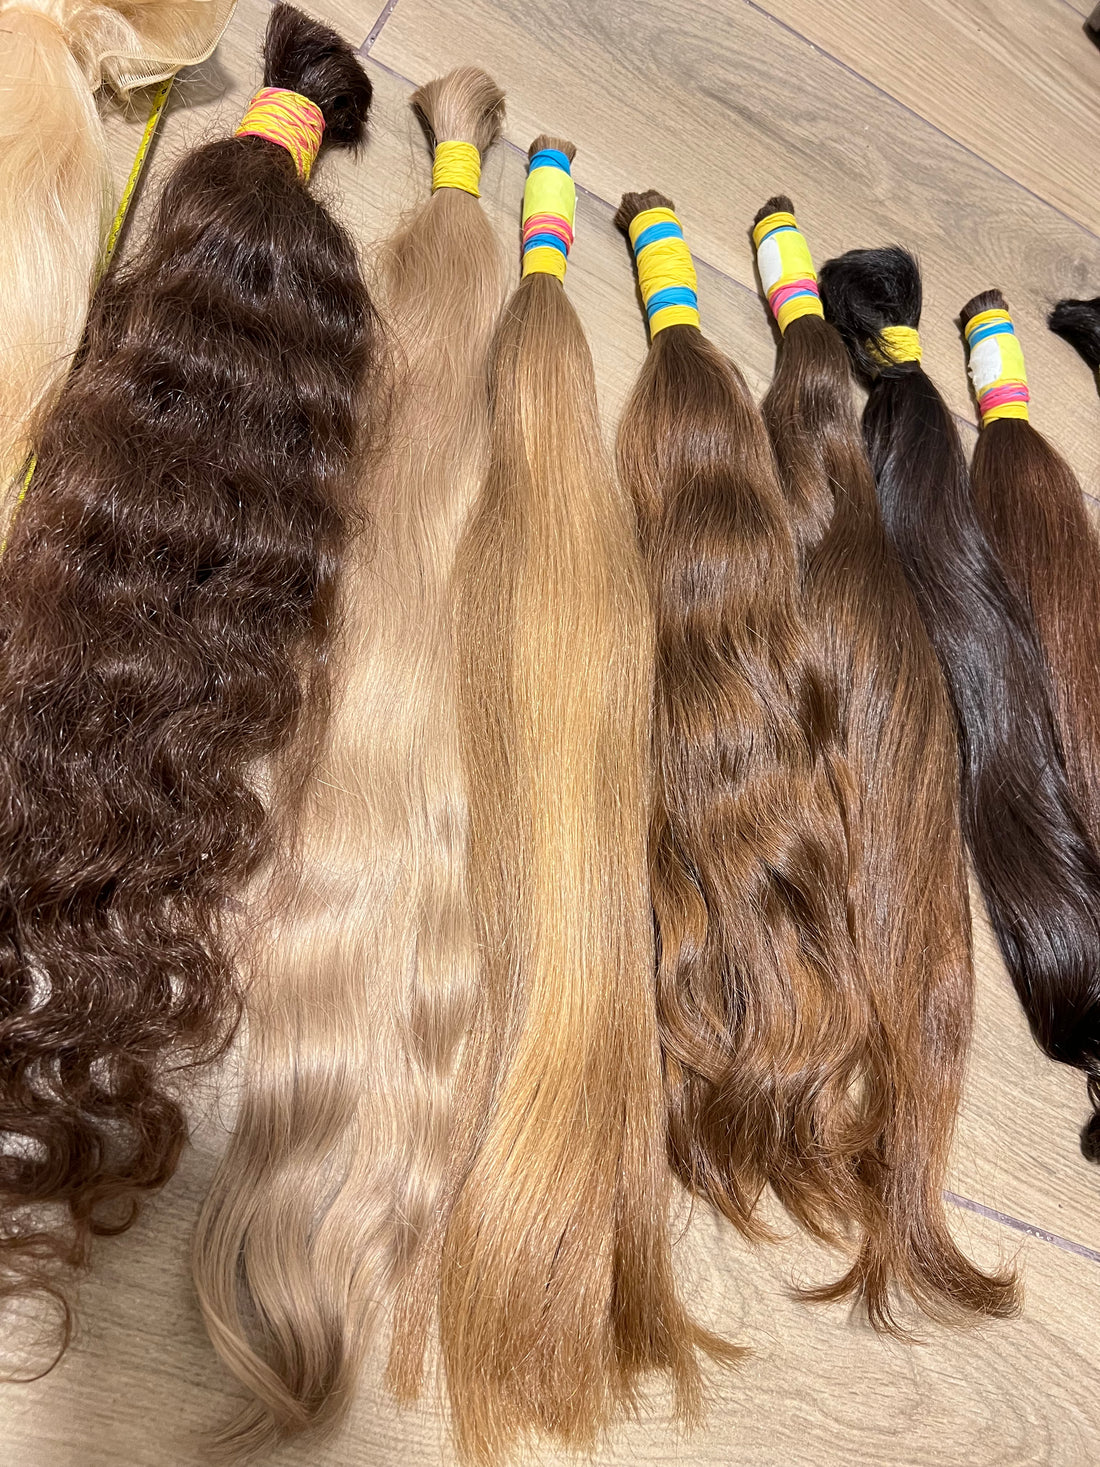 Slavic Hair Extensions: A Salon Owner's Perspective